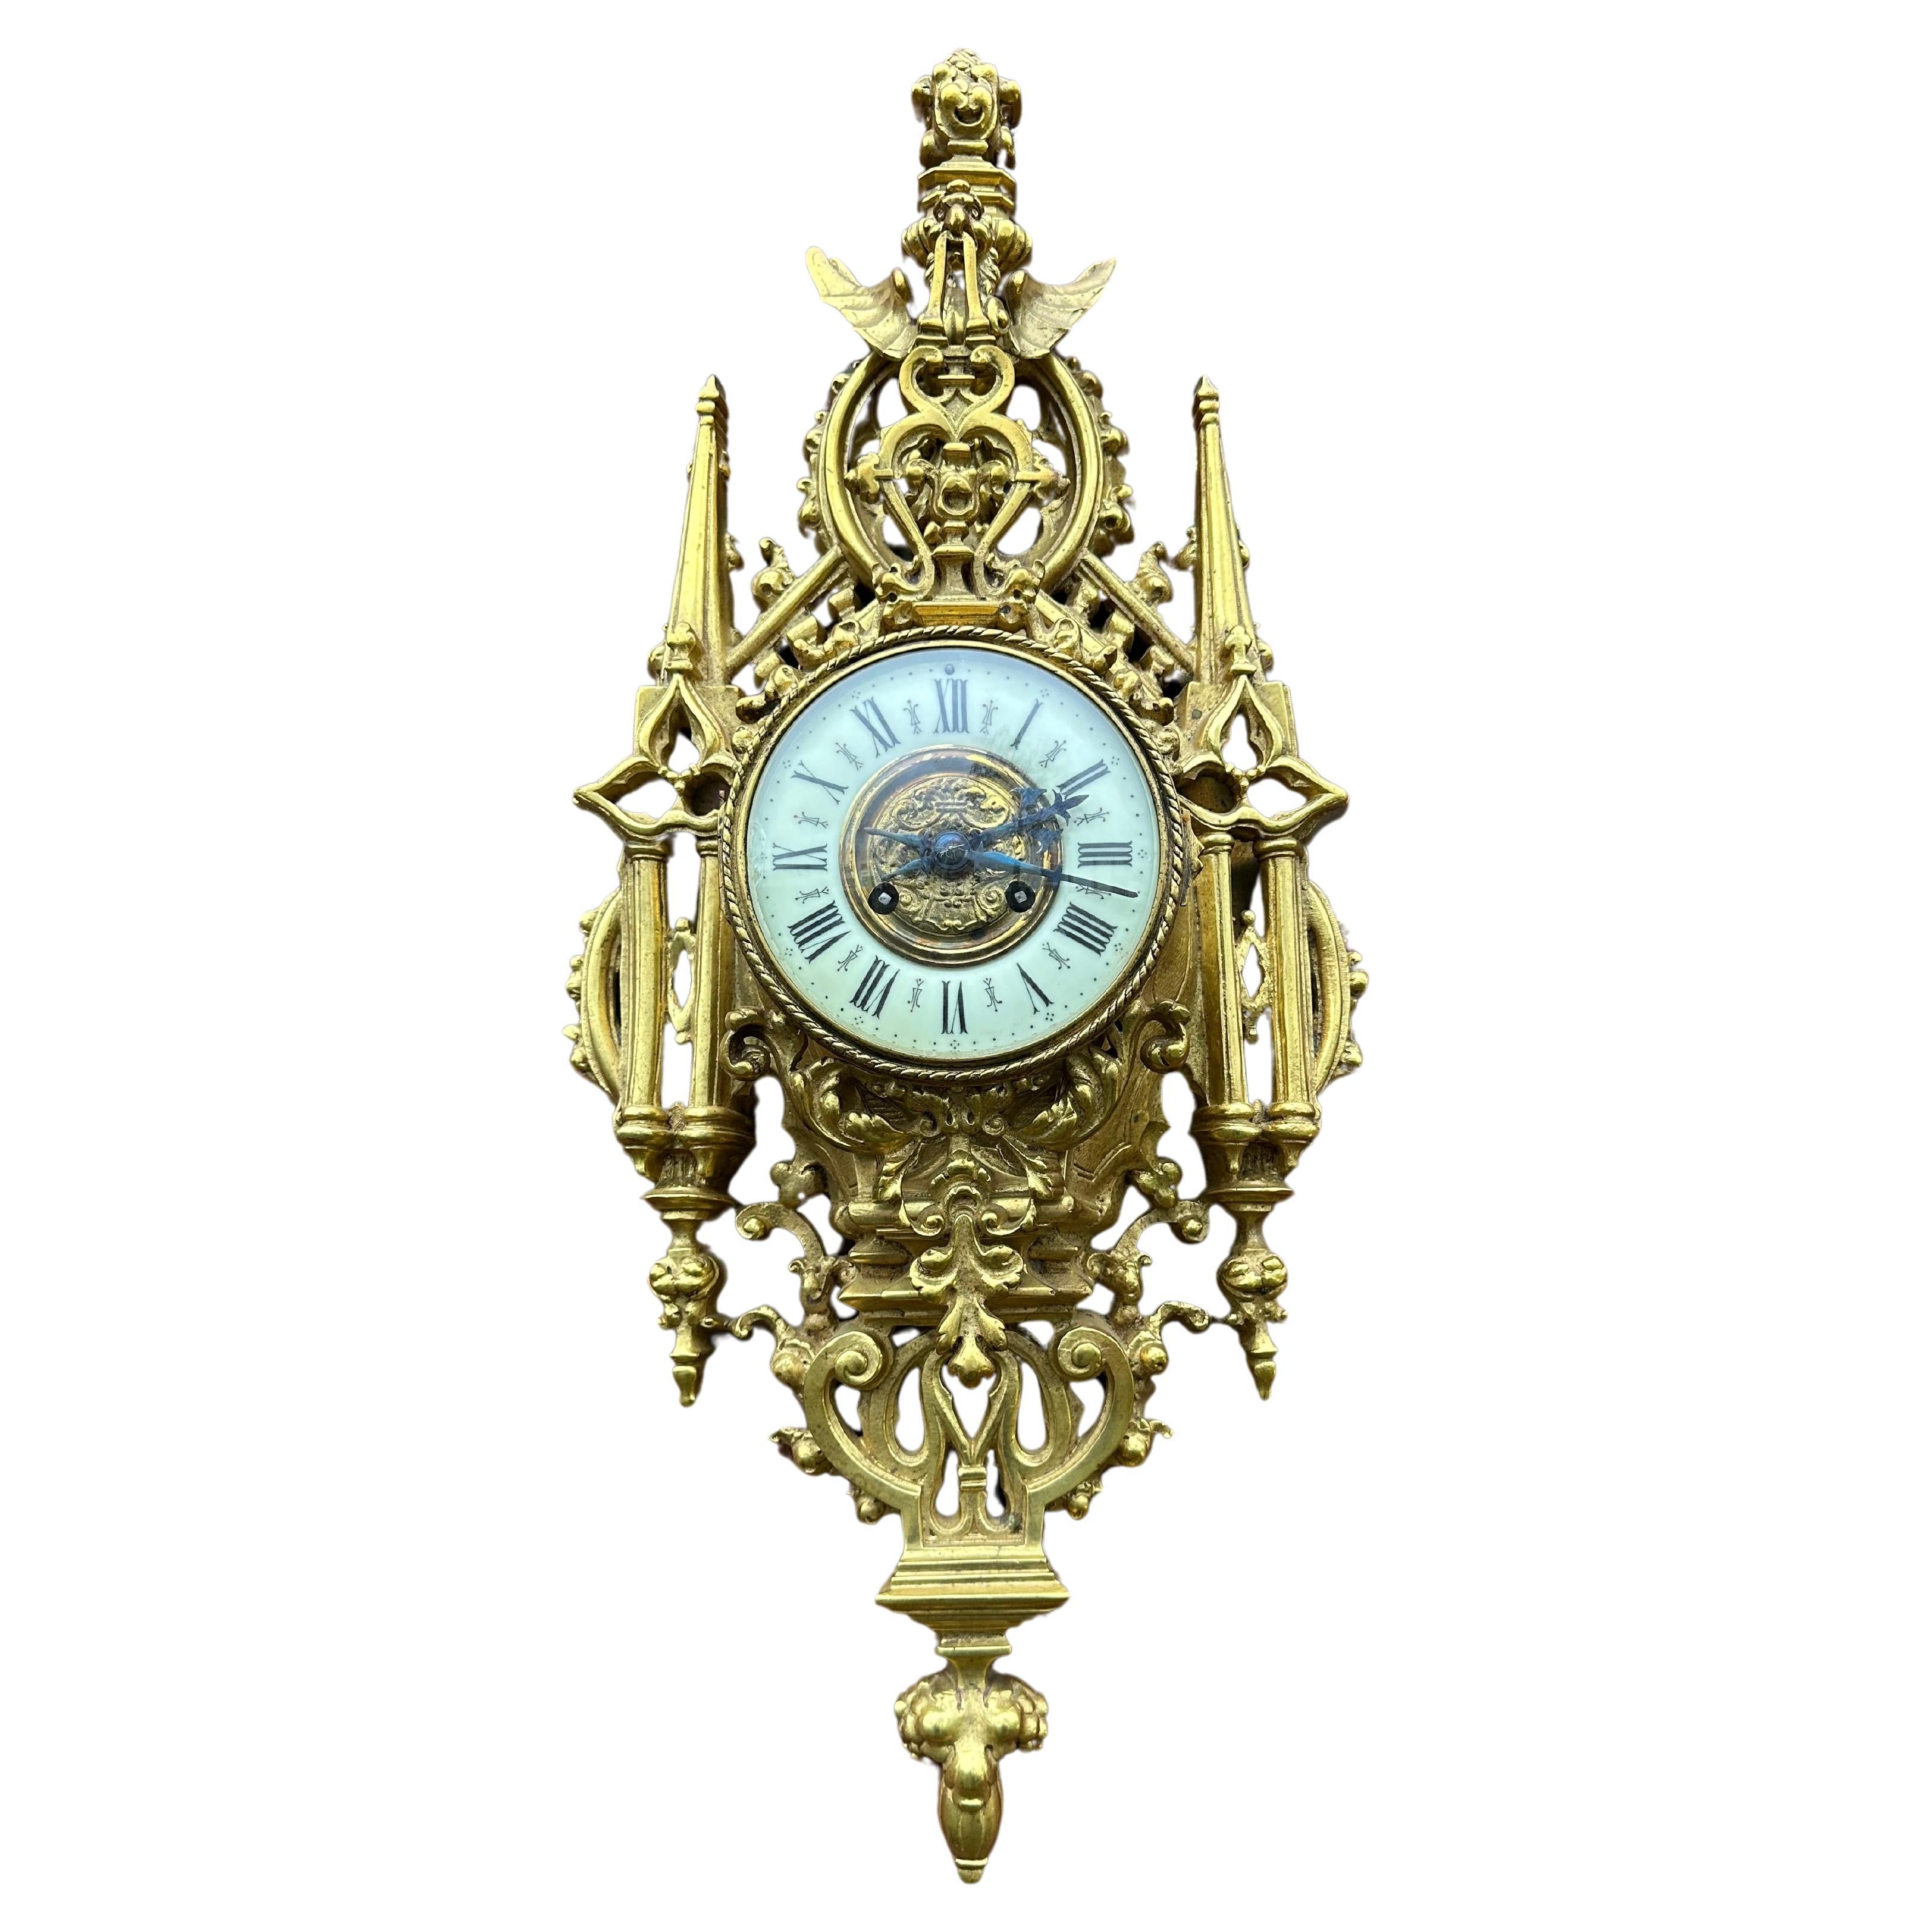 Rare Antique Gothic Revival Gilt Bronze Wall Cartel Clock with Griffin Sculpture For Sale